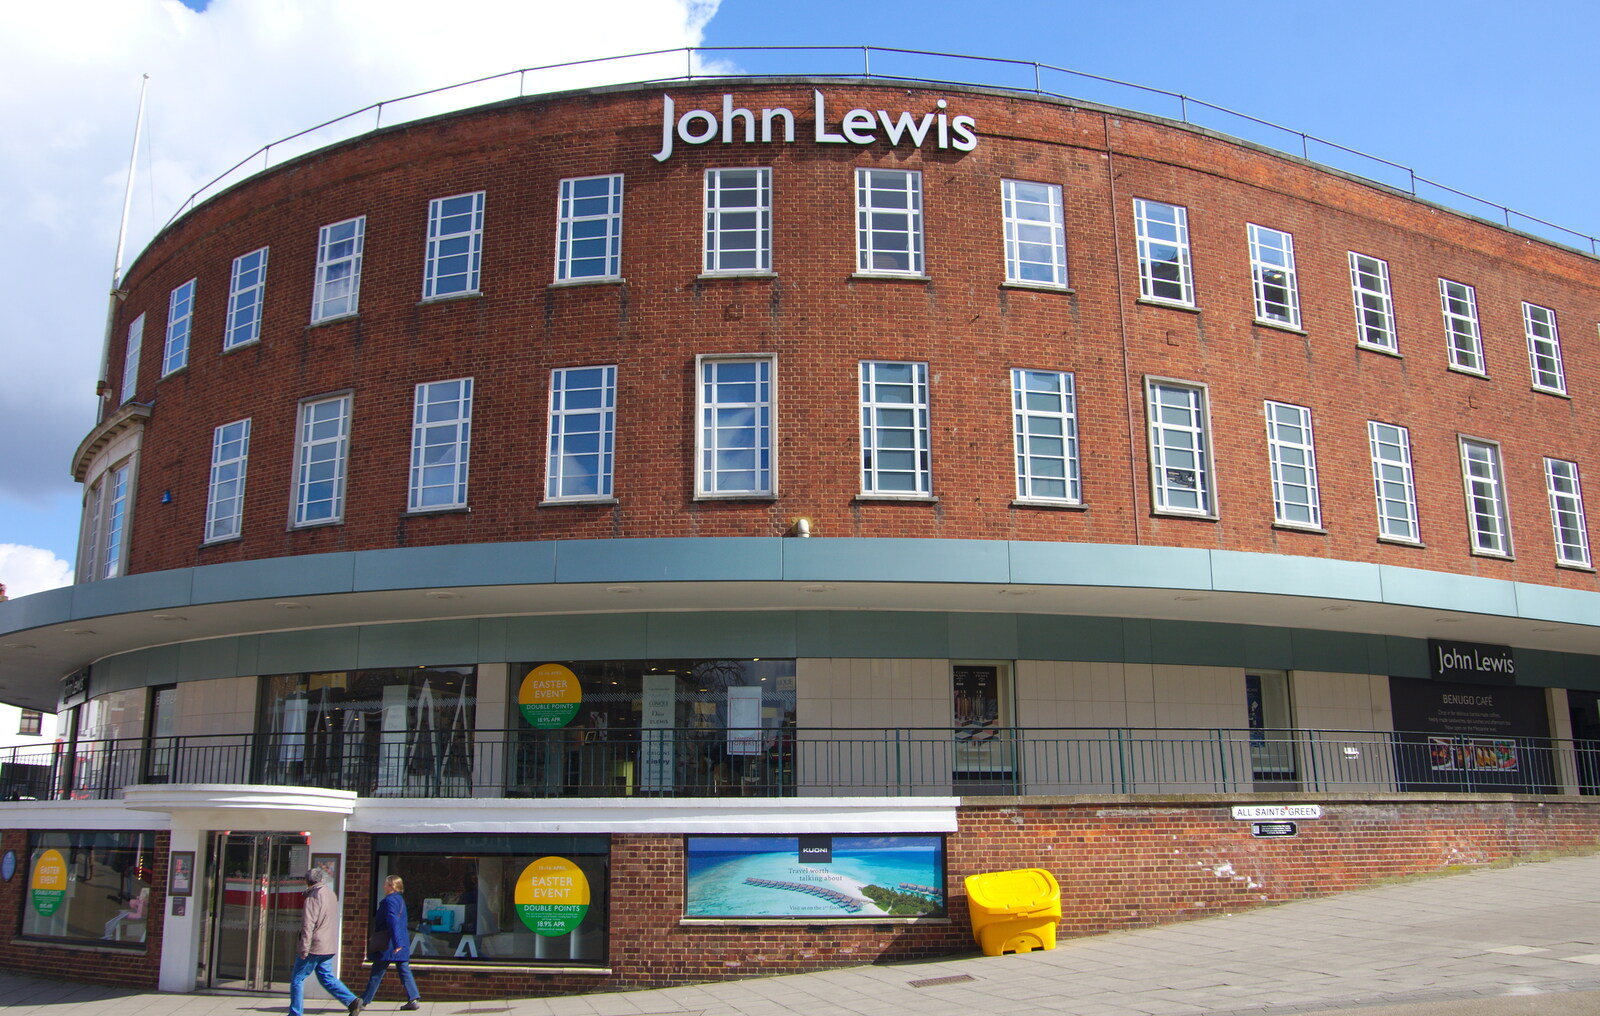 The 1930s stylings of John Lewis in Norwich from Singing in John Lewis, Norwich, Norfolk - 13th April 2019